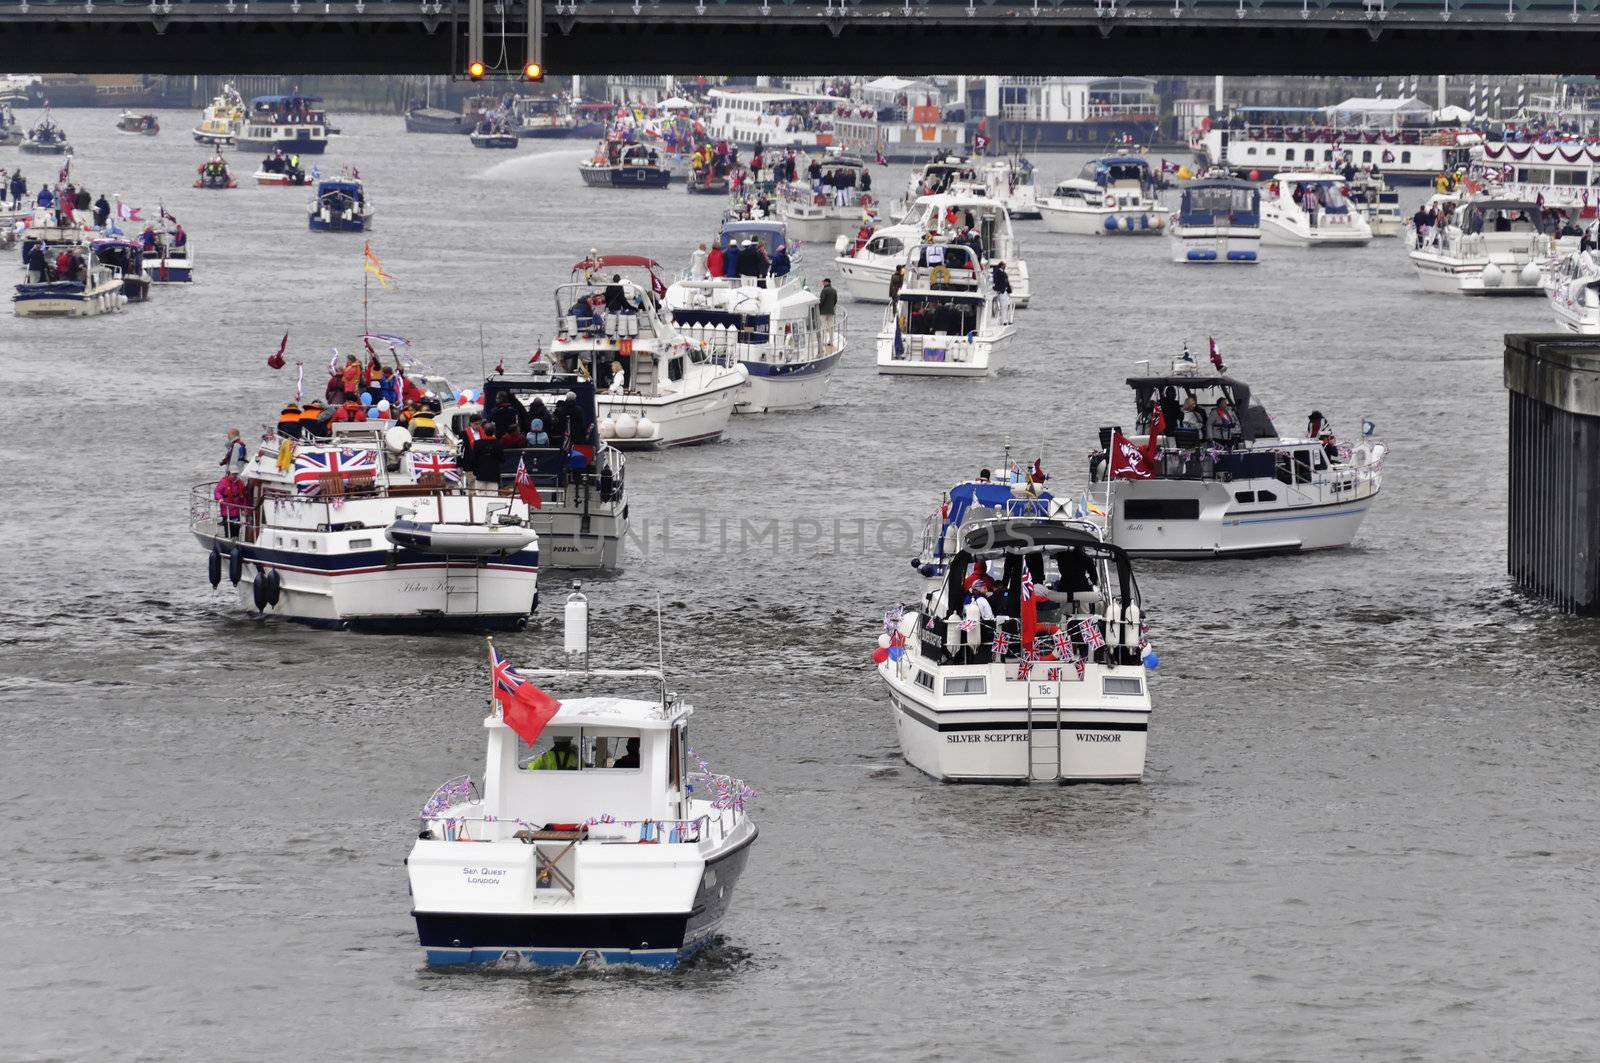 LONDON, UK, Sunday June 3, 2012. Hundred of boats muster on the river Thames in Putney (west London) for the Thames Diamond Jubilee Pageant to celebrate the Queen's Diamond Jubilee.